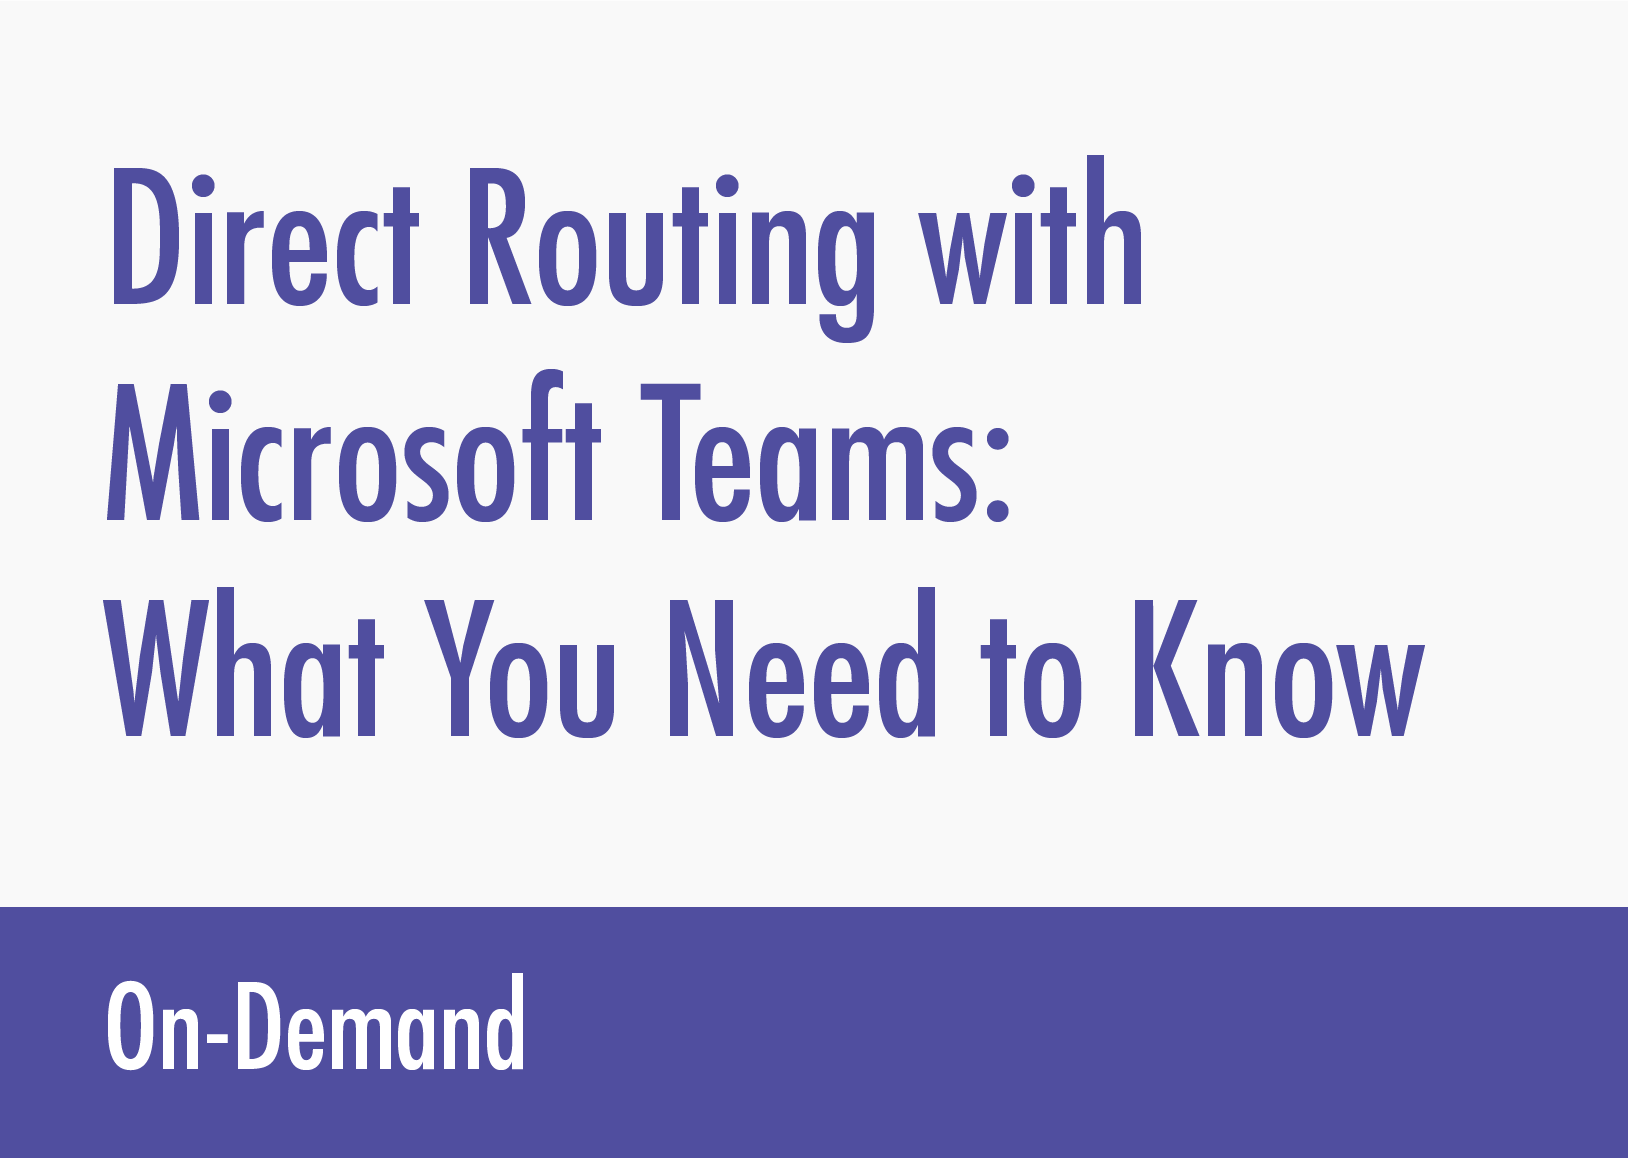 direct-routing-microsoft-teams1@4x